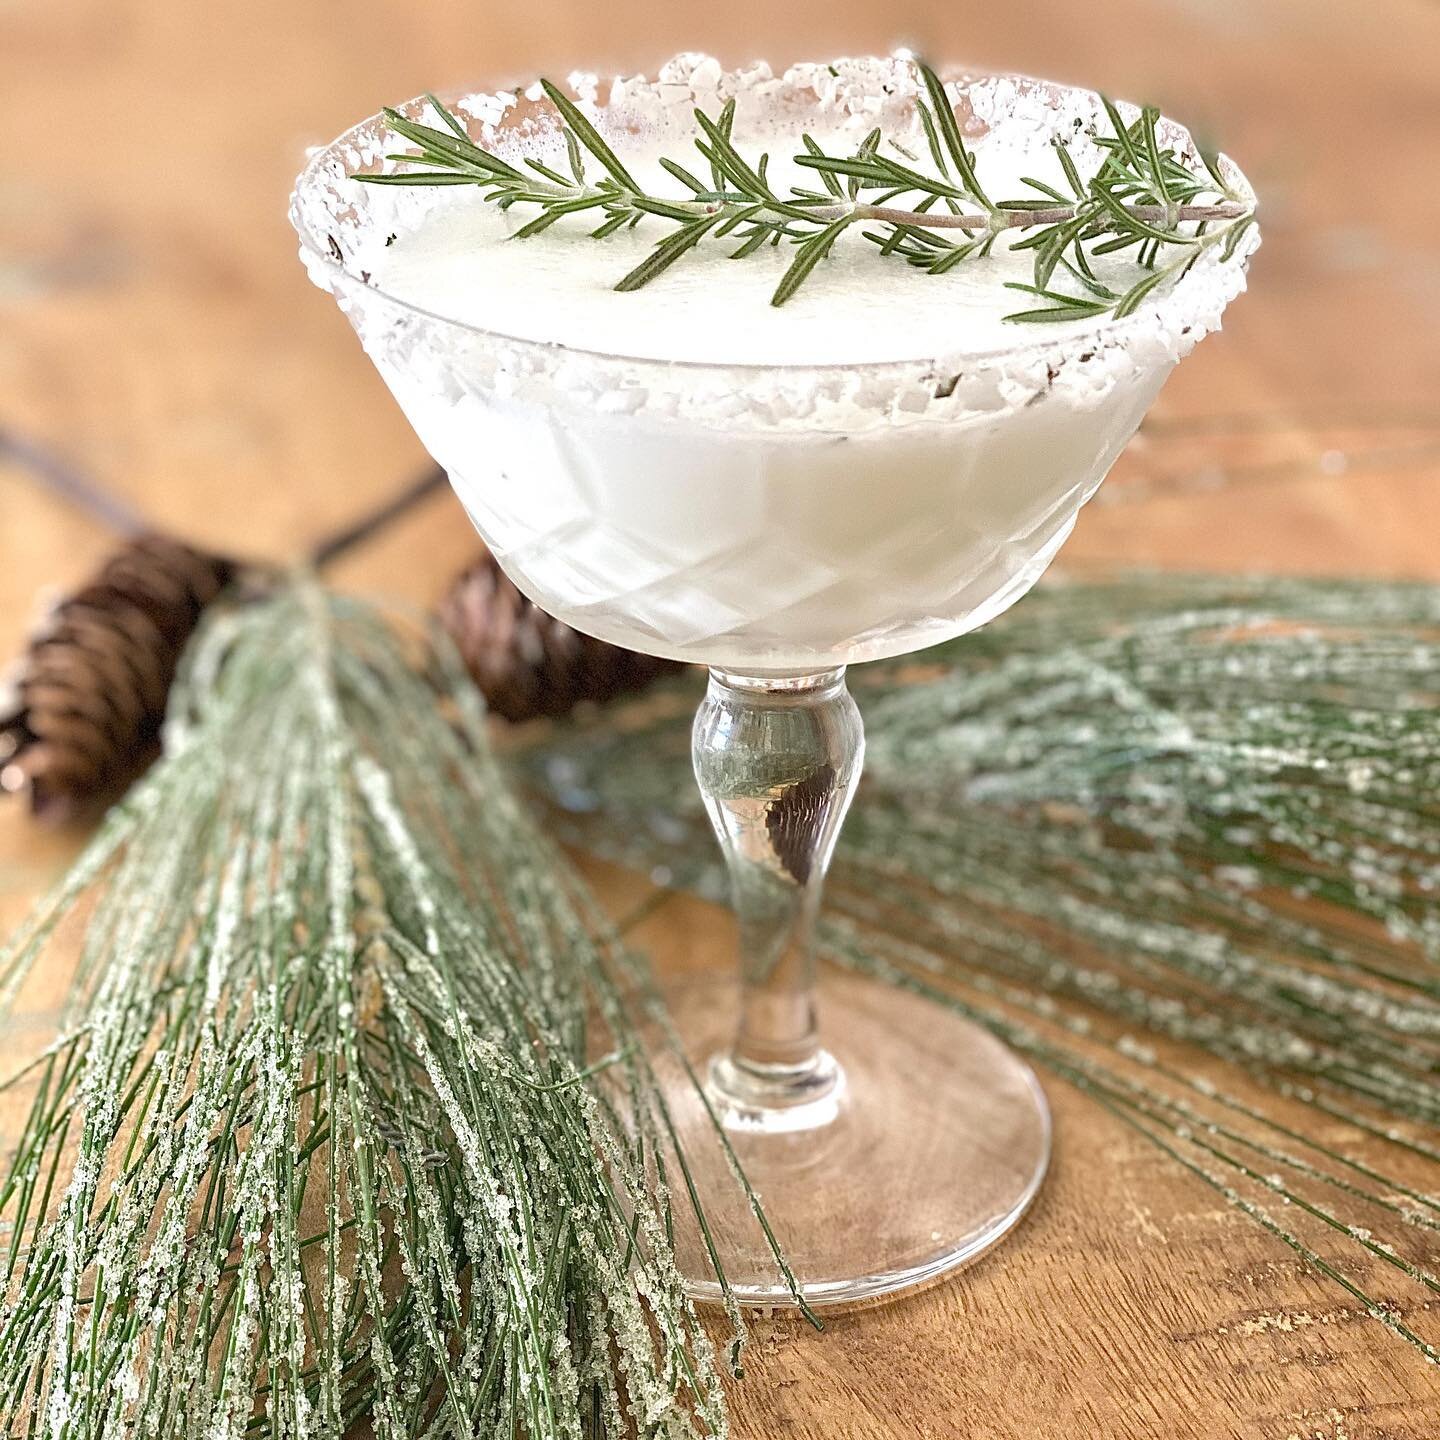 Snowy Pines Cocktail &bull; I&rsquo;ve full-on switched to Christmas mode. I guess the entire month of November was long enough to mourn Halloween - haha! This is the perfect cocktail to sip fireside throughout the month of December. The rosemary sim